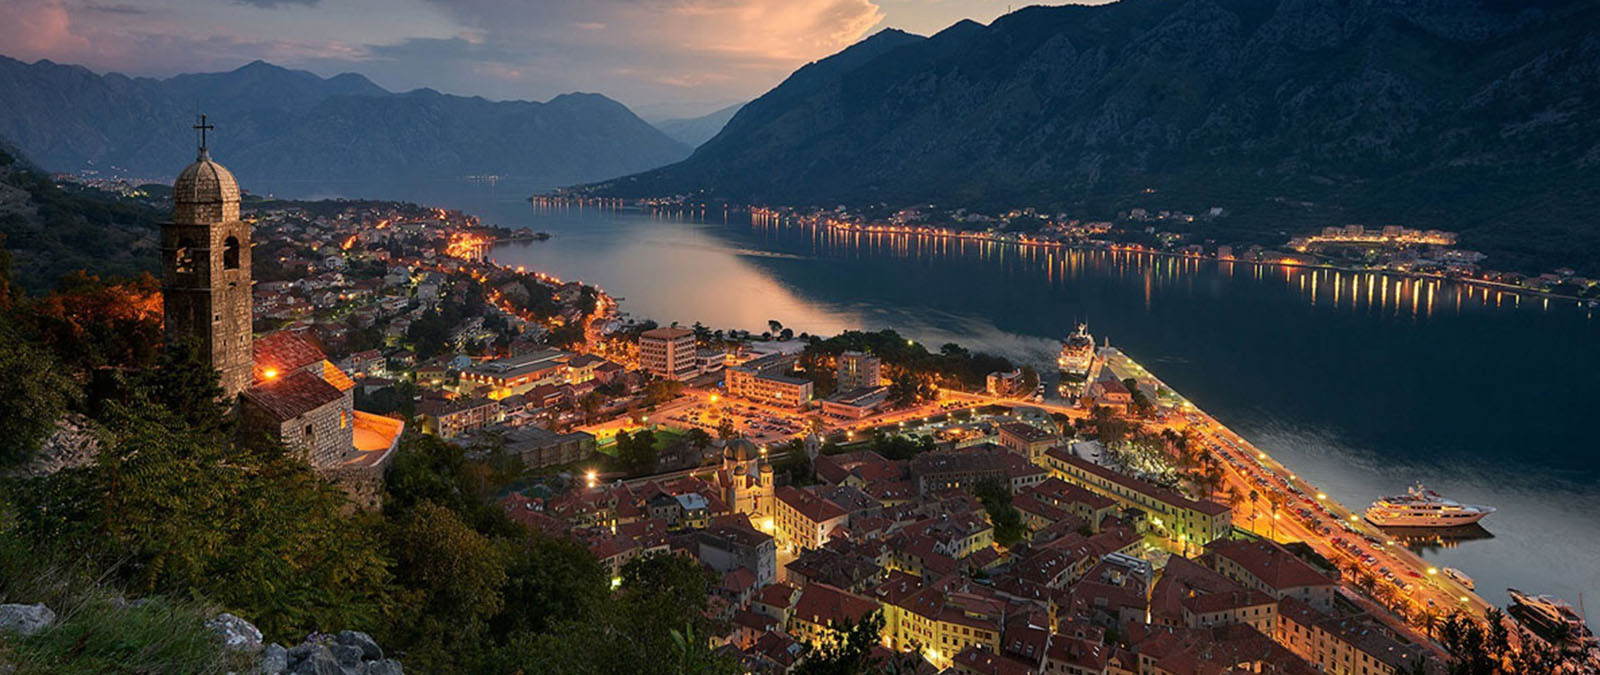 Montenegro is the smallest ex-Yugoslav Republic country but one of the most beautiful and promising.